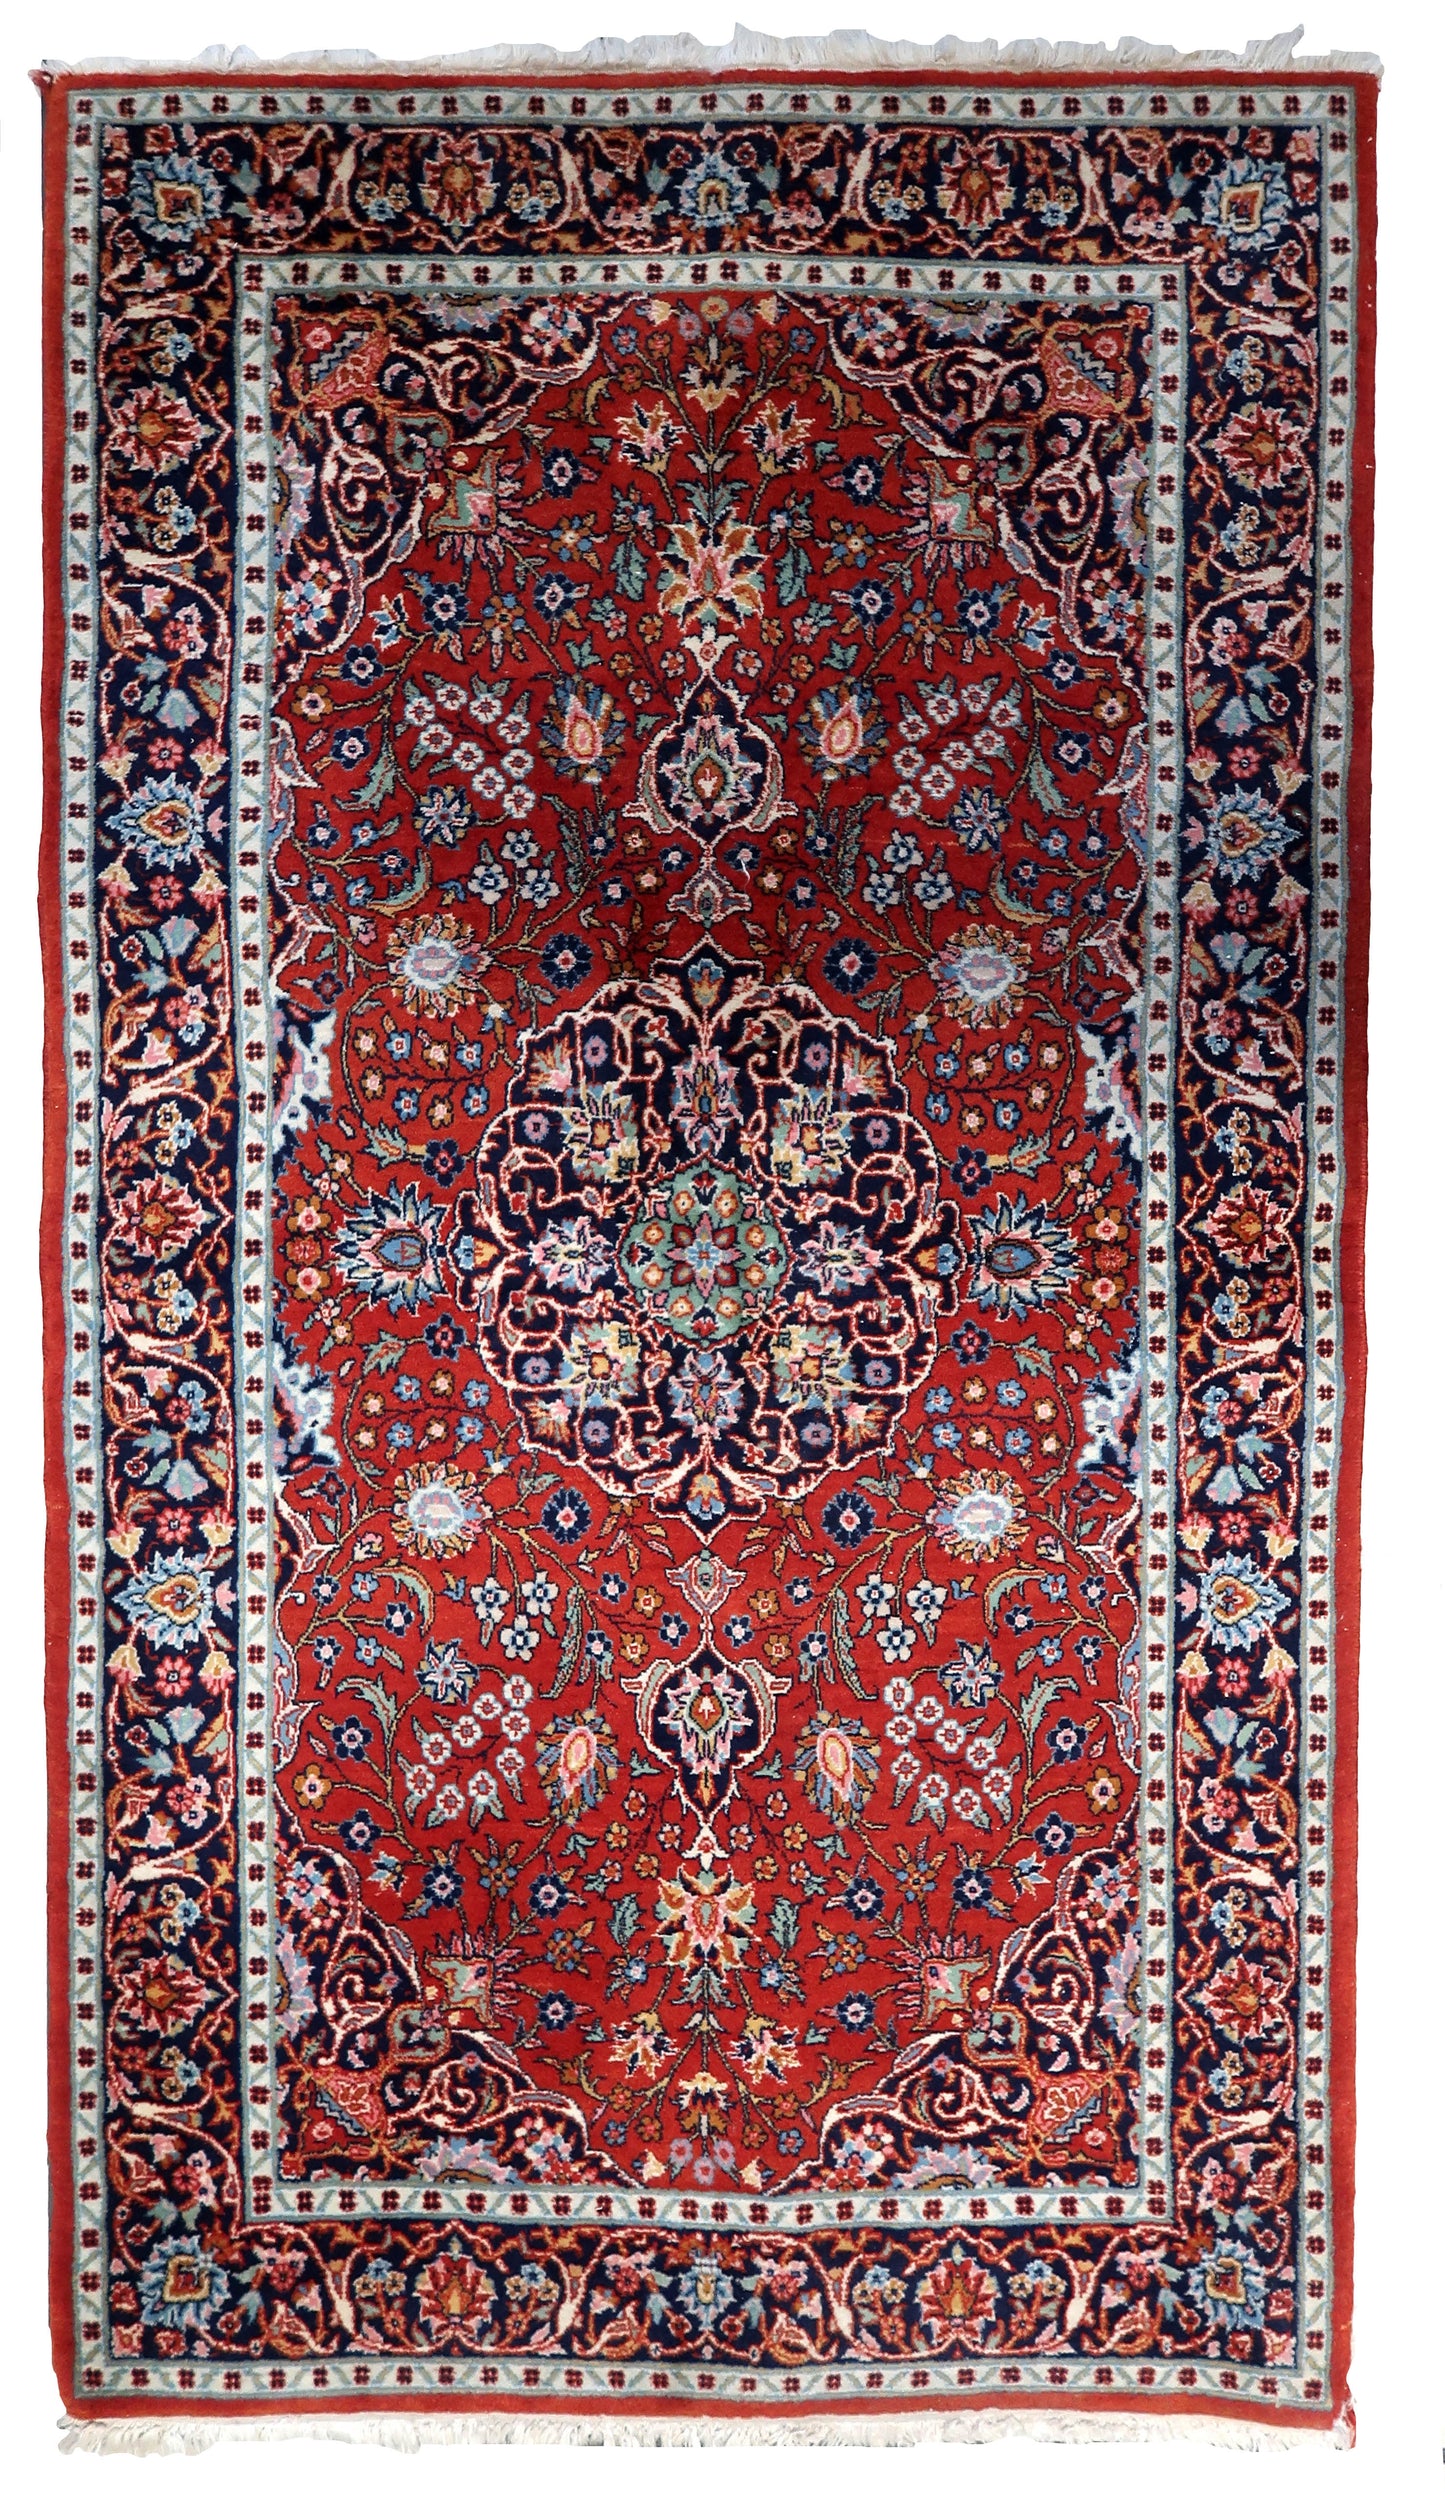  Handmade antique Persian Kashan rug with vibrant floral design on a red background